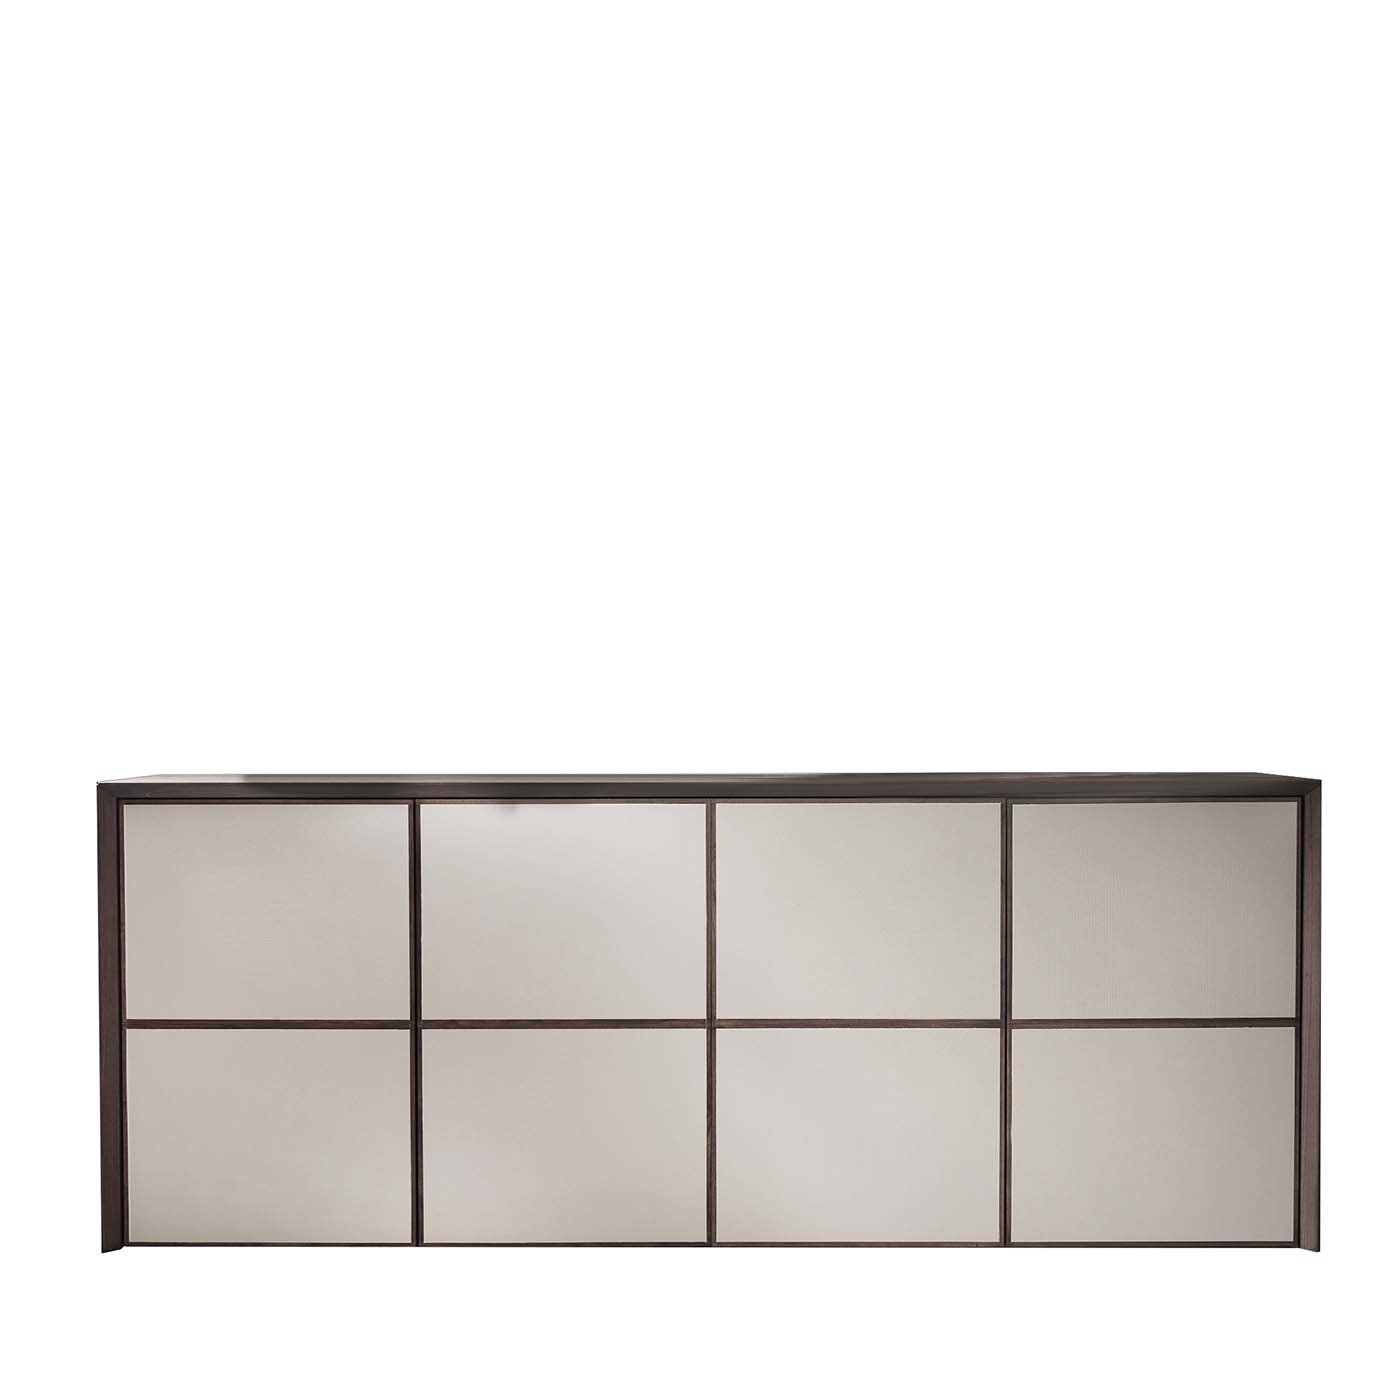 Flair Cupboard by Giuliano Cappelletti - Main view